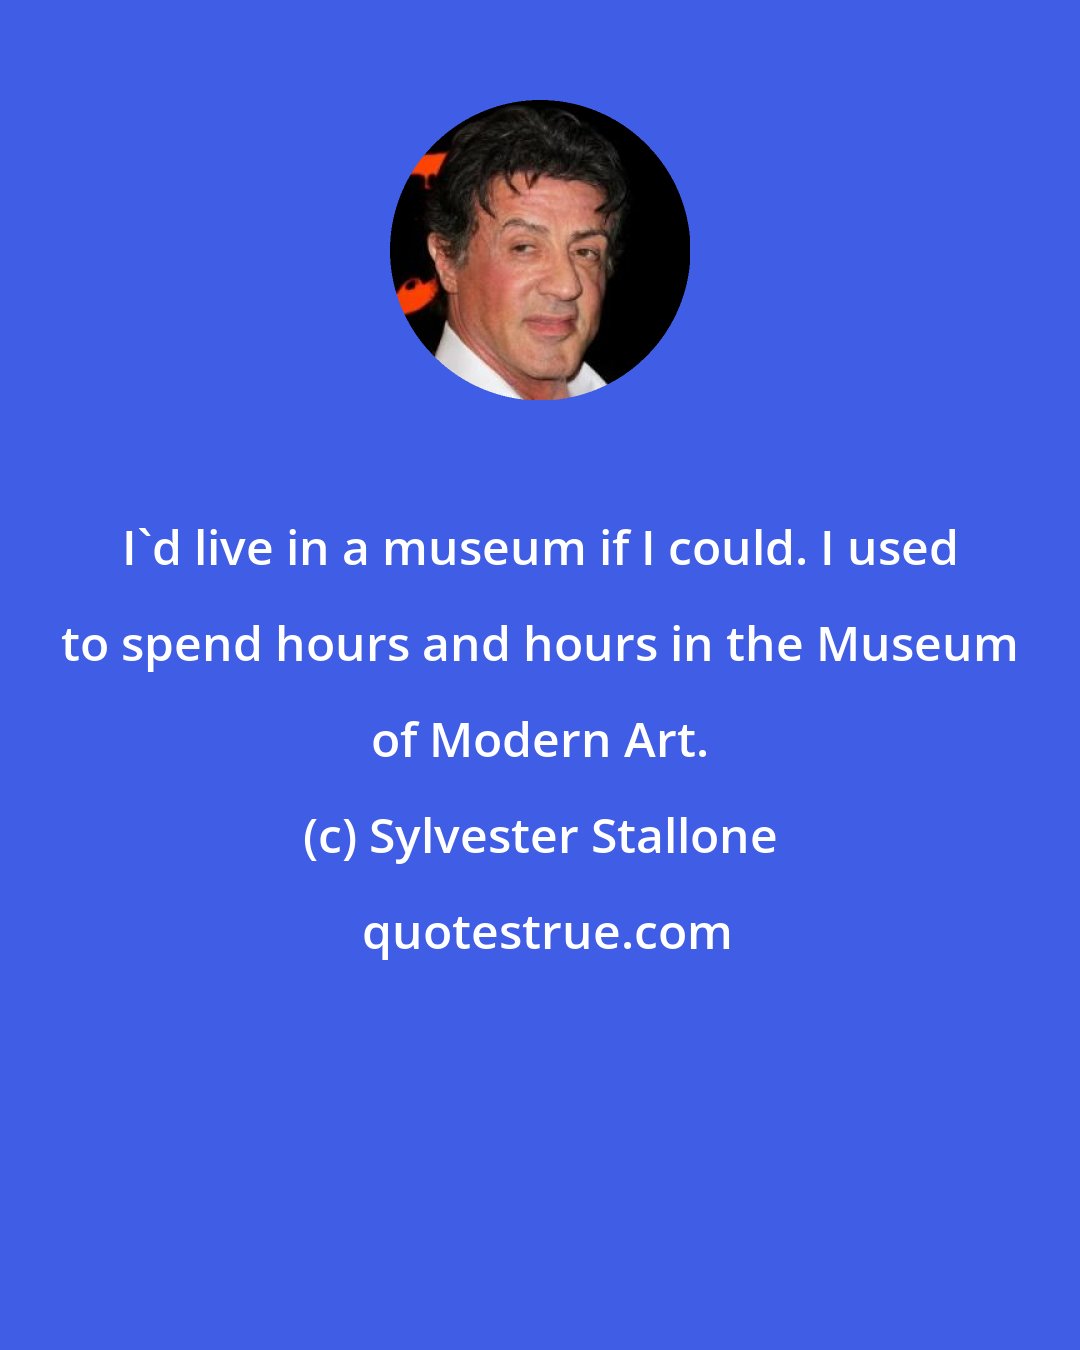 Sylvester Stallone: I'd live in a museum if I could. I used to spend hours and hours in the Museum of Modern Art.